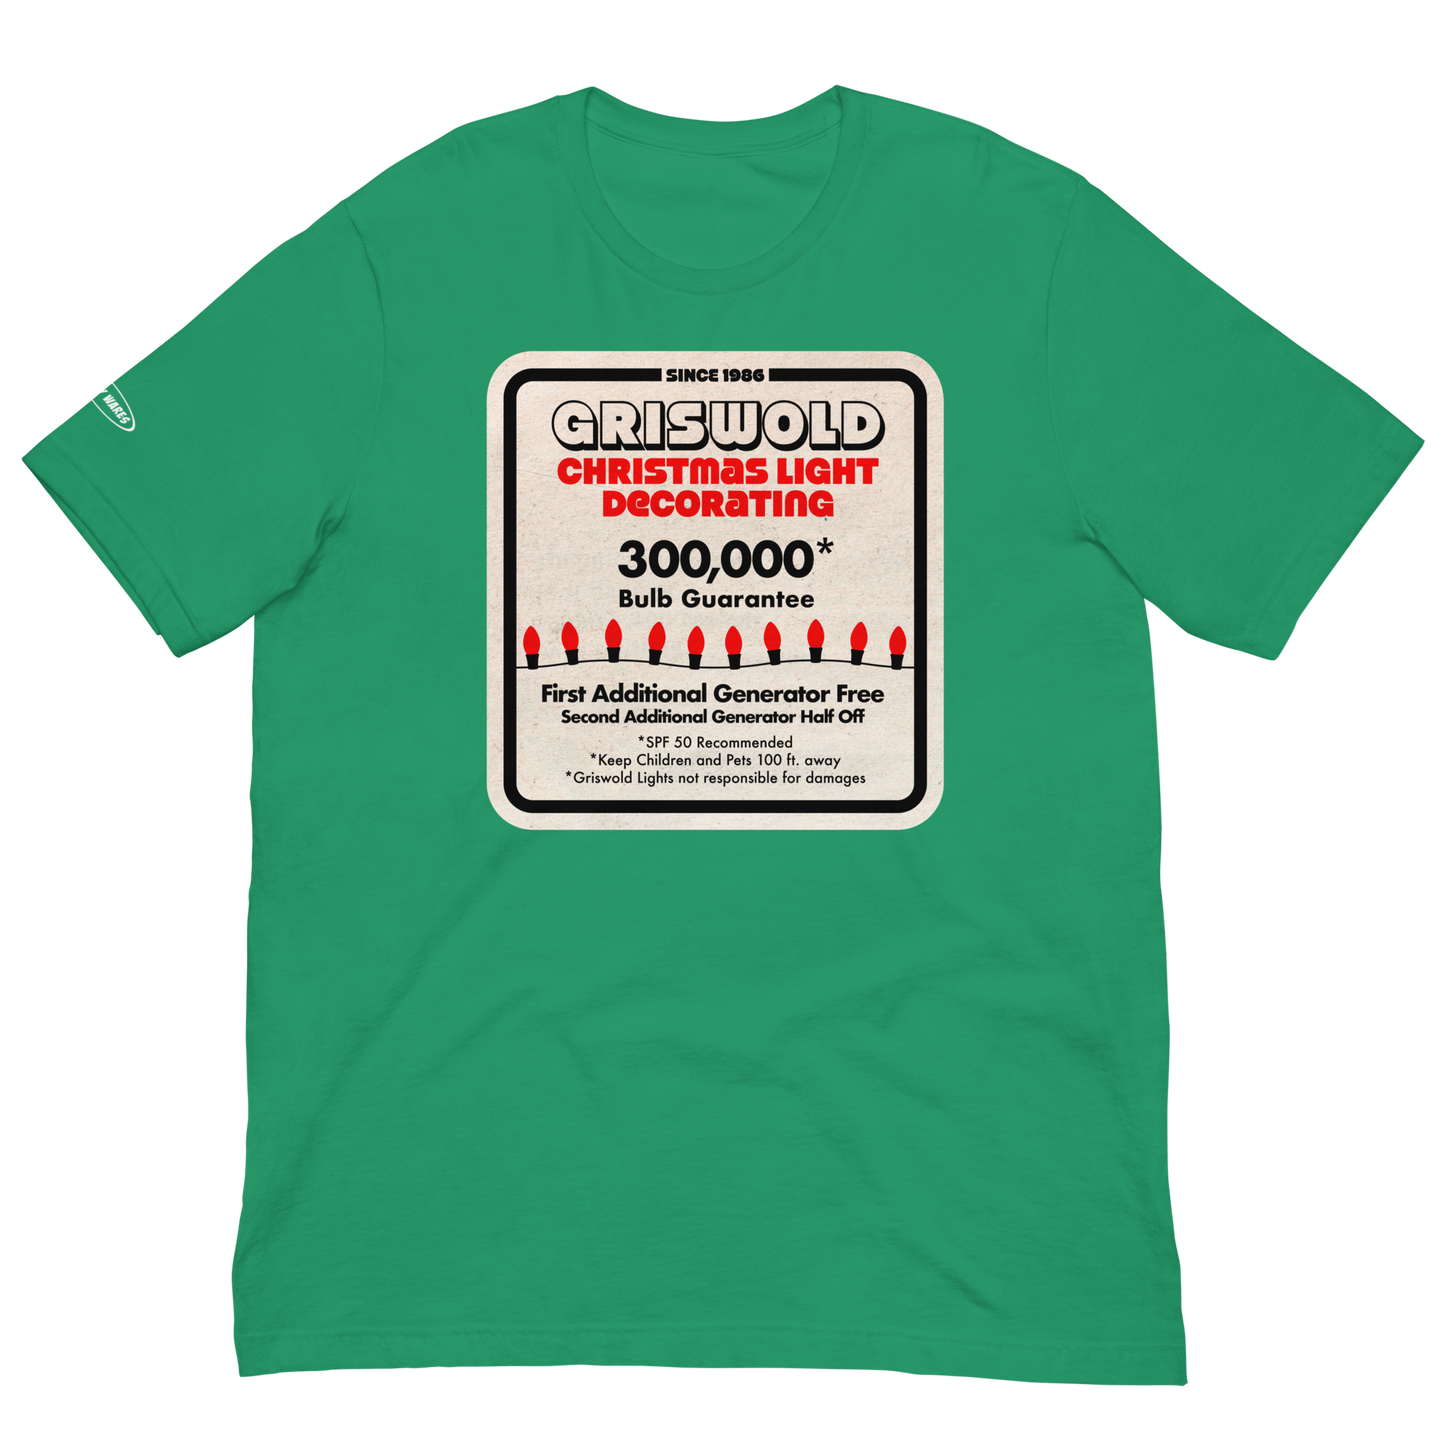 CHRISTMAS - Griswold Christmas Light Decorating - Funny t-shirt